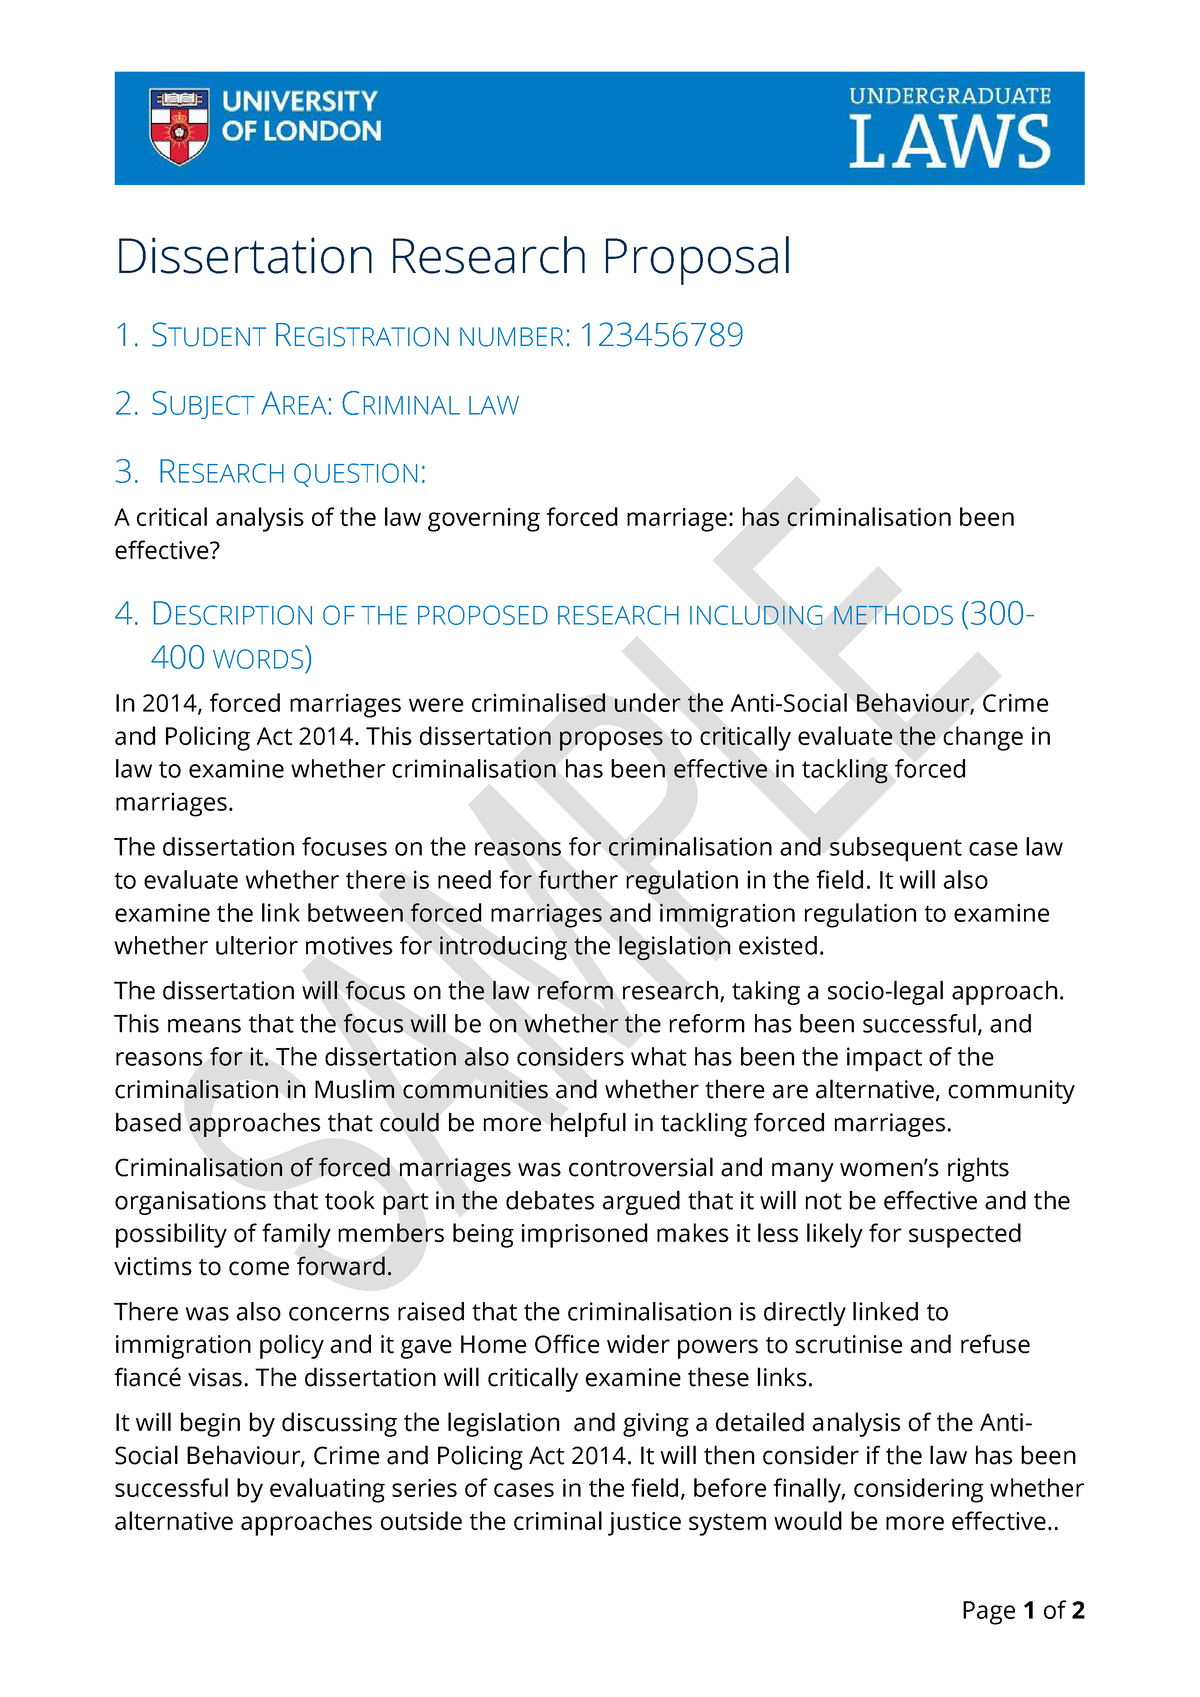 law school research proposal sample